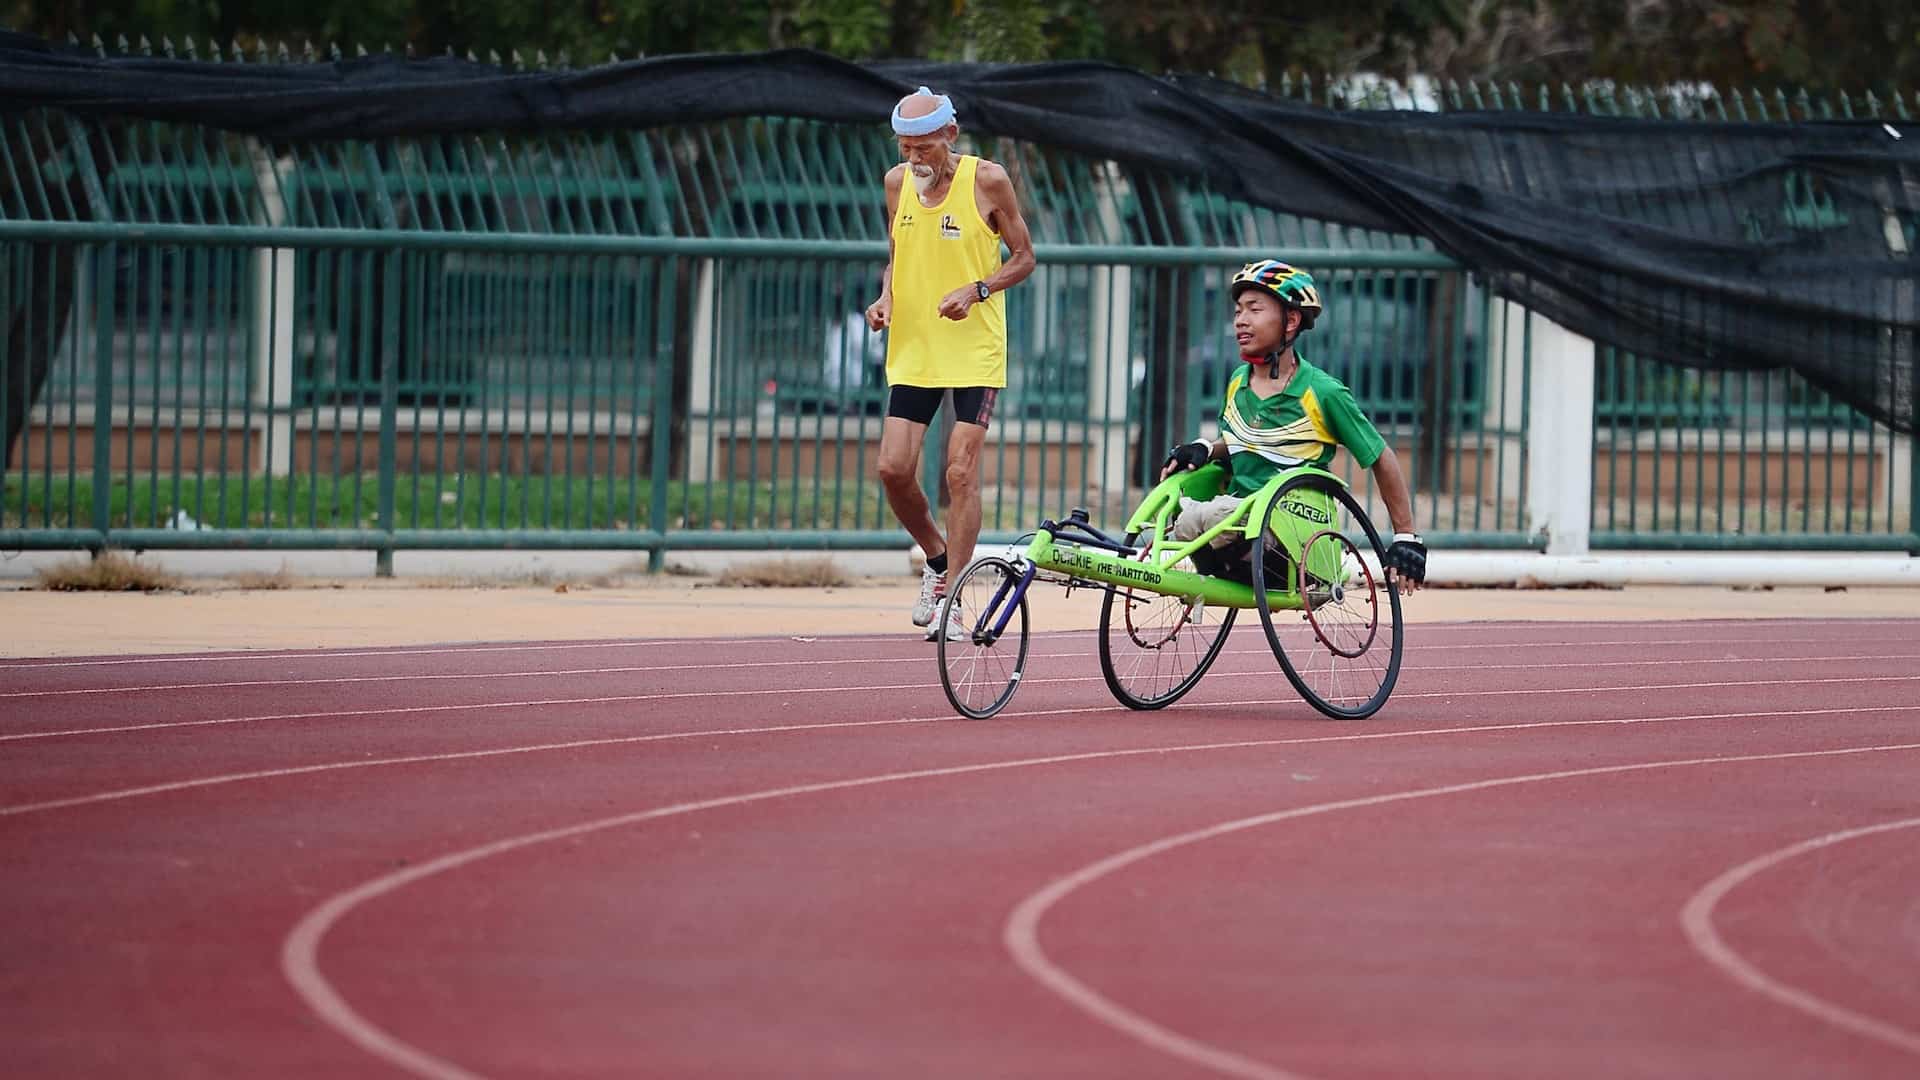 student with disability in wheelchair playing sports